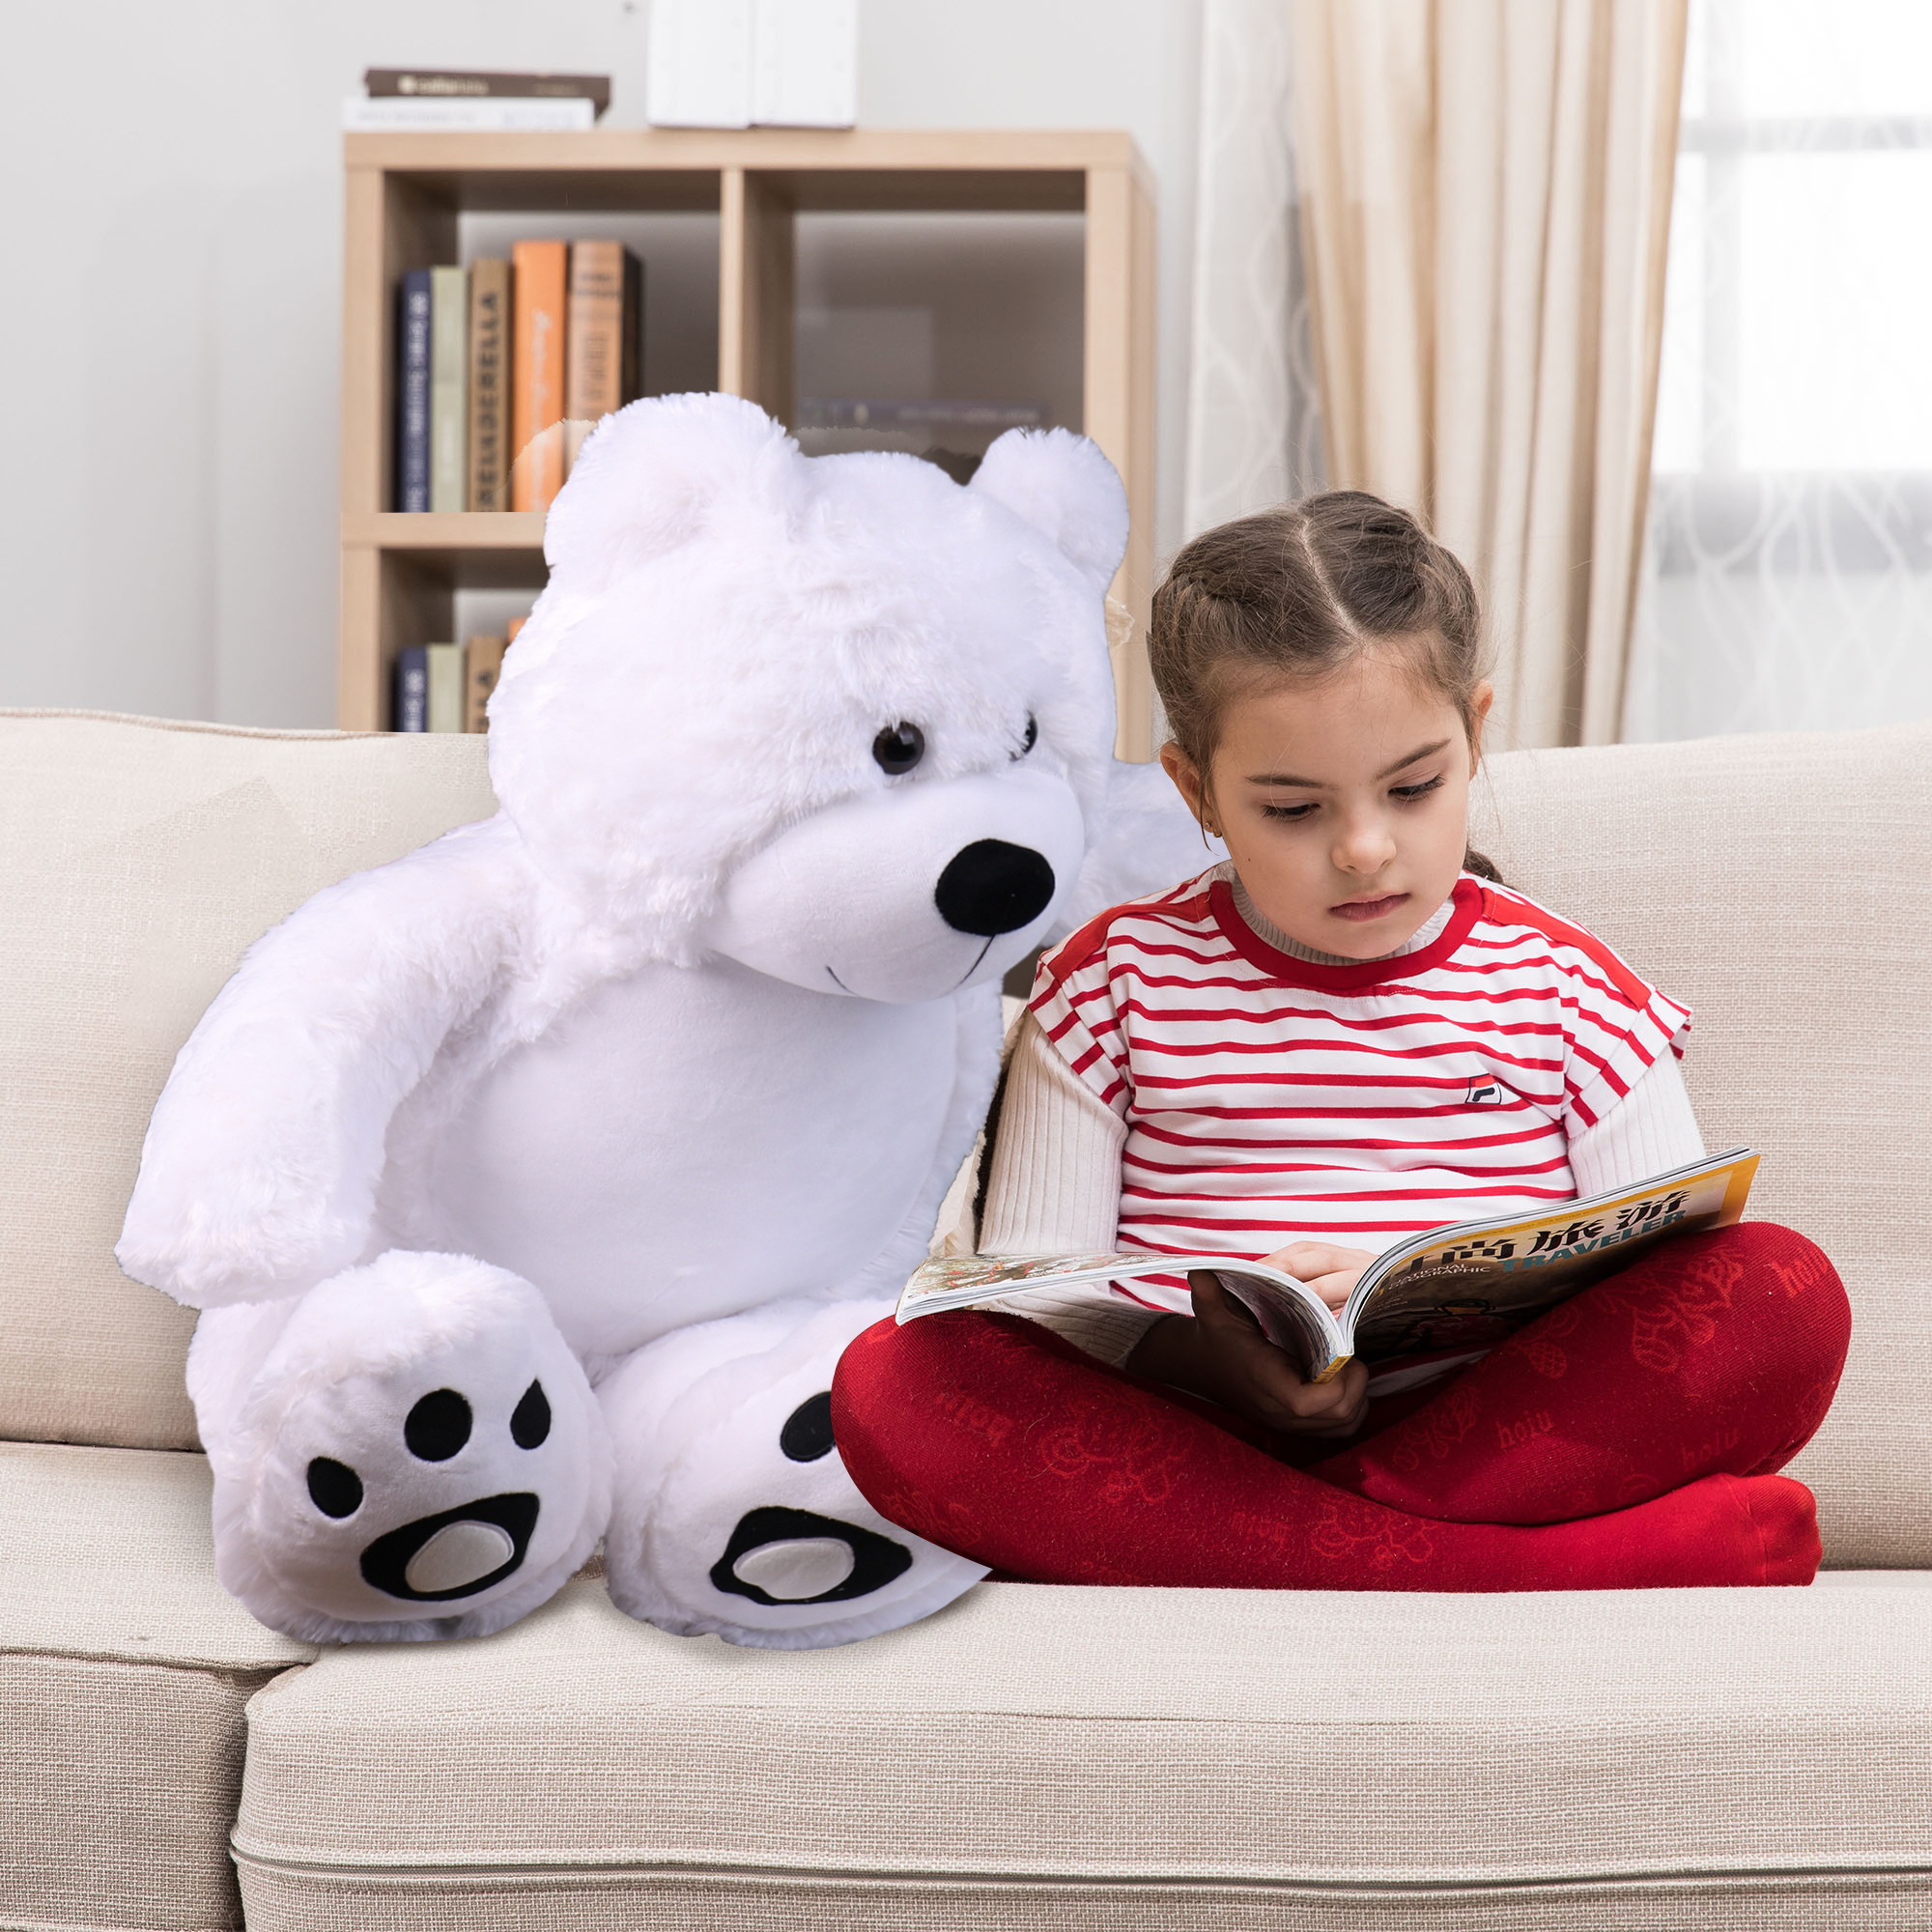 WOWMAX 3 Foot Giant Teddy Bear Daney Cuddly Stuffed Plush Animals Teddy Bear Toy Doll for Birthday Christmas White 36 Inches - image 2 of 5